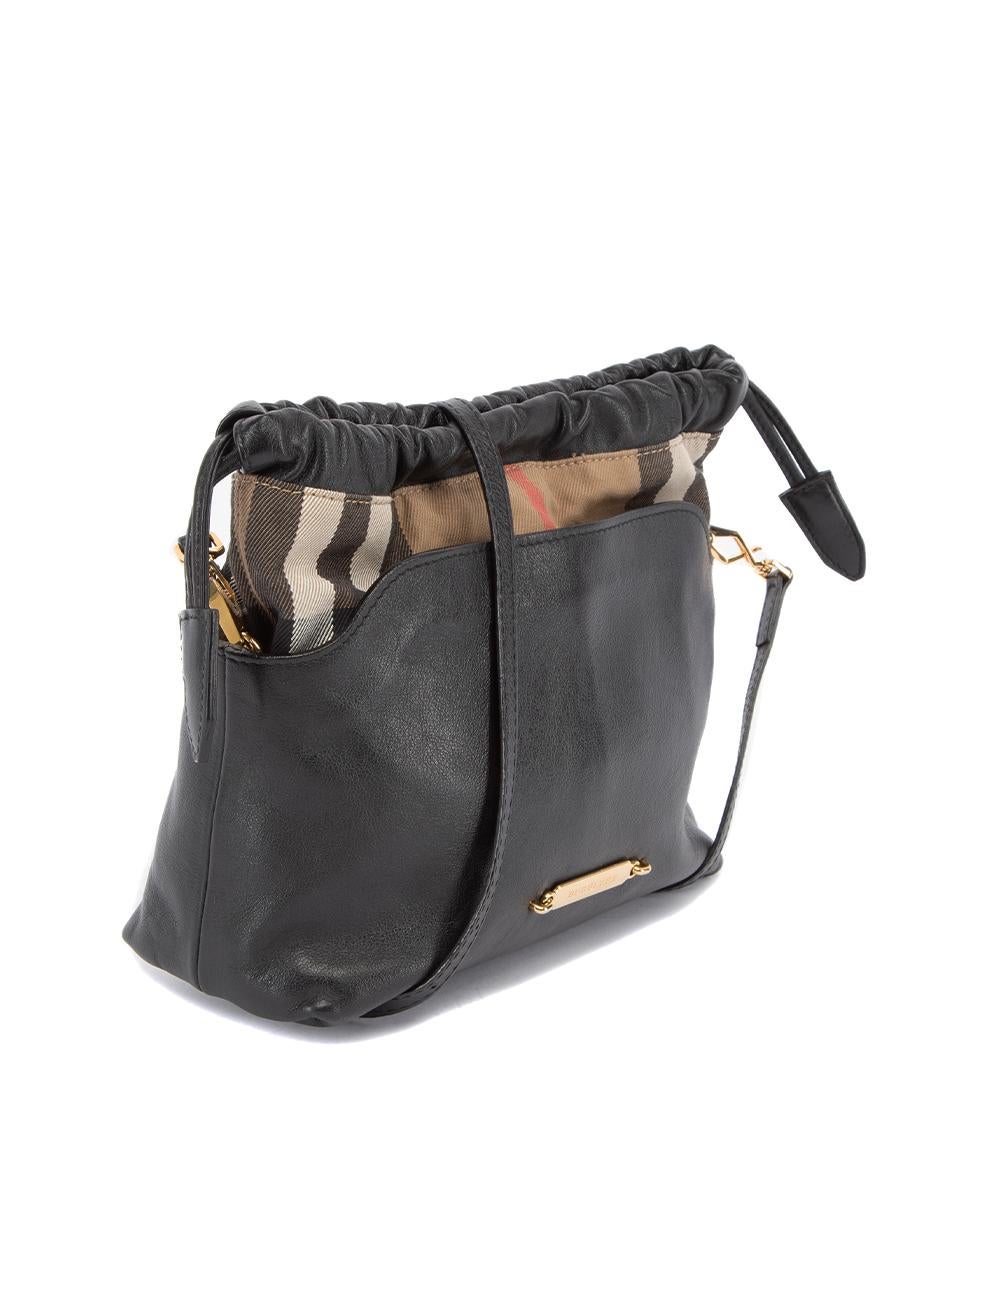 CONDITION is Very good. Minimal wear to bag is evident. Minimal wear to the leather material and some light scuffs at the bag corners on this used Burberry designer resale item. 
 
 Details
  Black
 Leather
 Mini crossbody bag
 House check panelled
